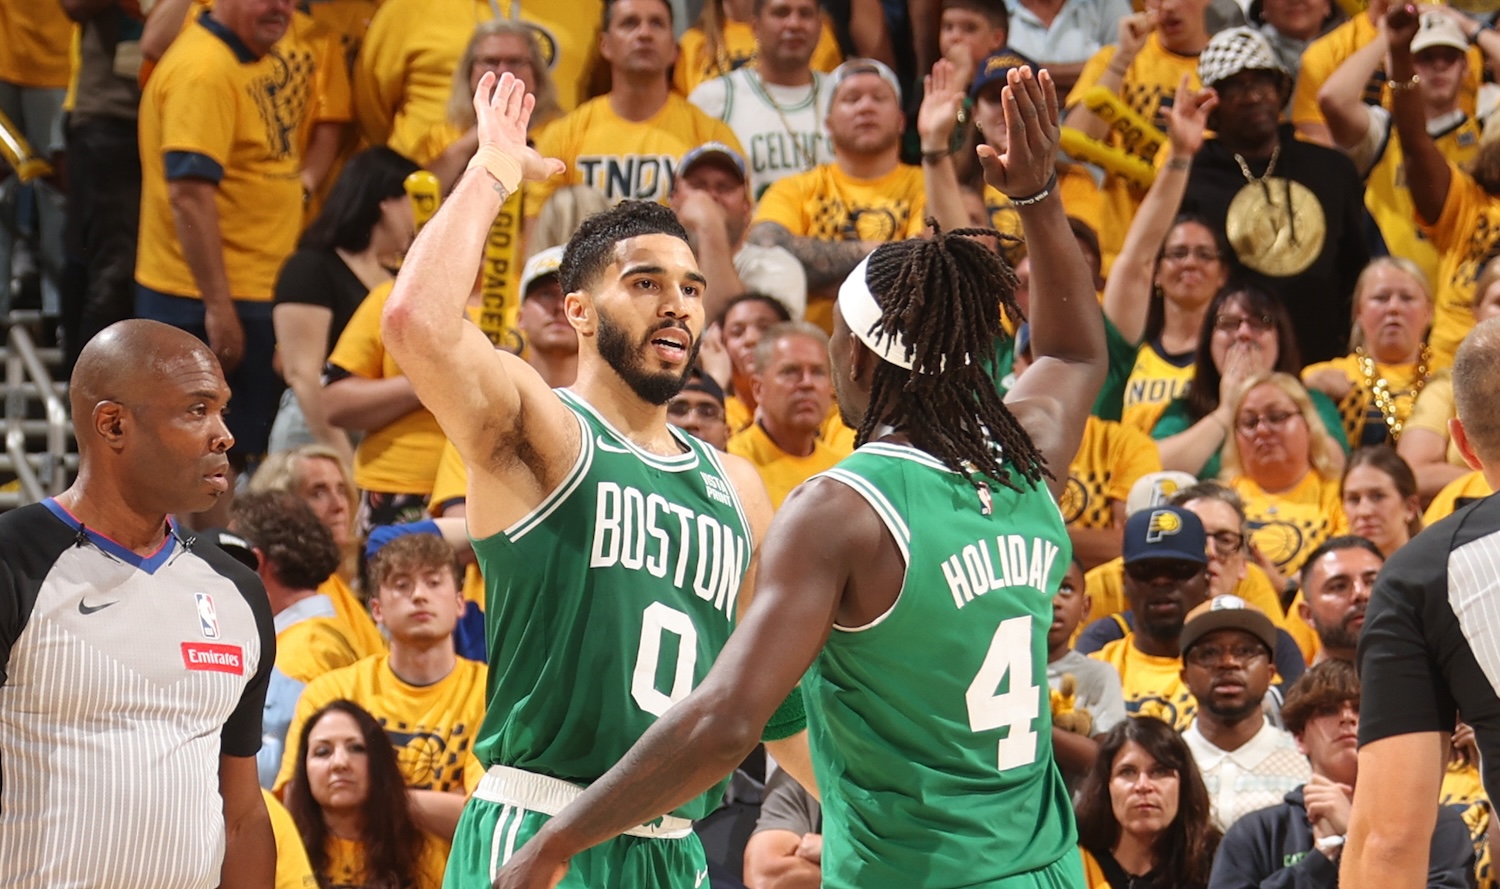 INDIANAPOLIS, IN - MAY 25: Jayson Tatum #0 and Jrue Holiday #4 of the Boston Celtics high five during the game against the Indiana Pacers during Game 3 of the Eastern Conference Finals of the 2024 NBA Playoffs on May 25, 2024 at Gainbridge Fieldhouse in Indianapolis, Indiana. NOTE TO USER: User expressly acknowledges and agrees that, by downloading and or using this Photograph, user is consenting to the terms and conditions of the Getty Images License Agreement. Mandatory Copyright Notice: Copyright 2024 NBAE (Photo by Nathaniel S. Butler/NBAE via Getty Images)